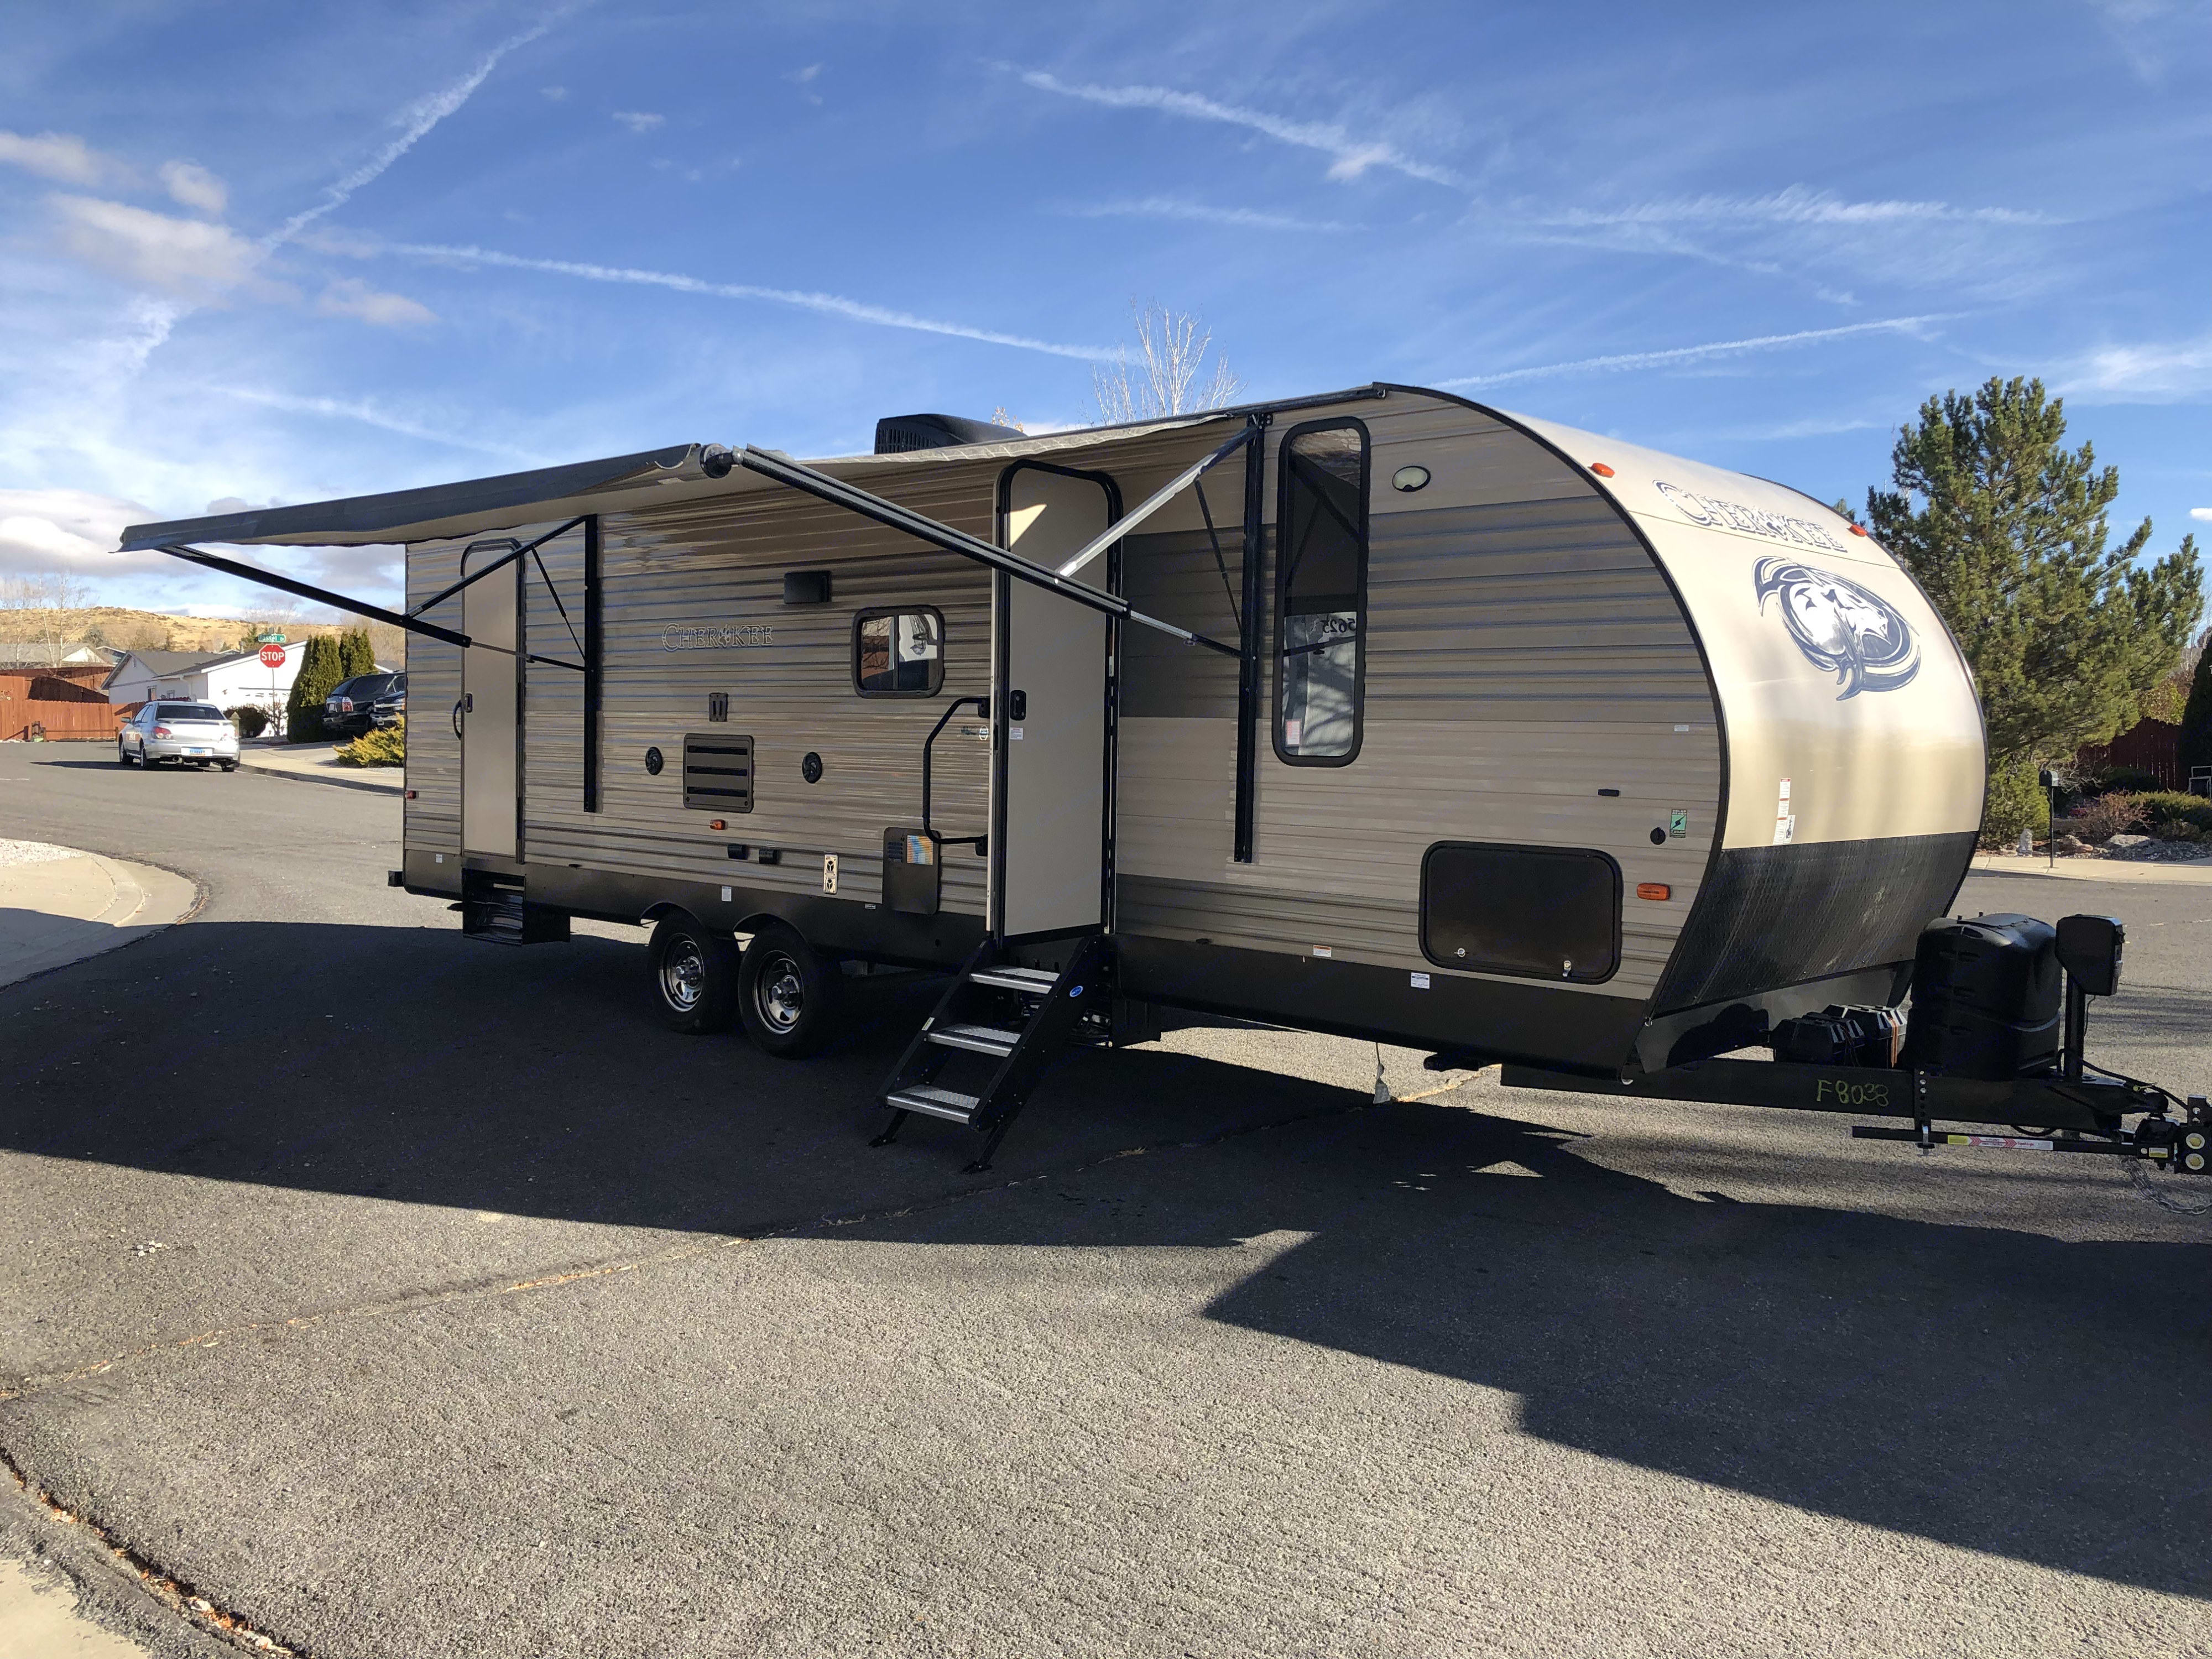 2018 Forest River Cherokee 274dbh Trailer Rental In Reno Nv Outdoorsy